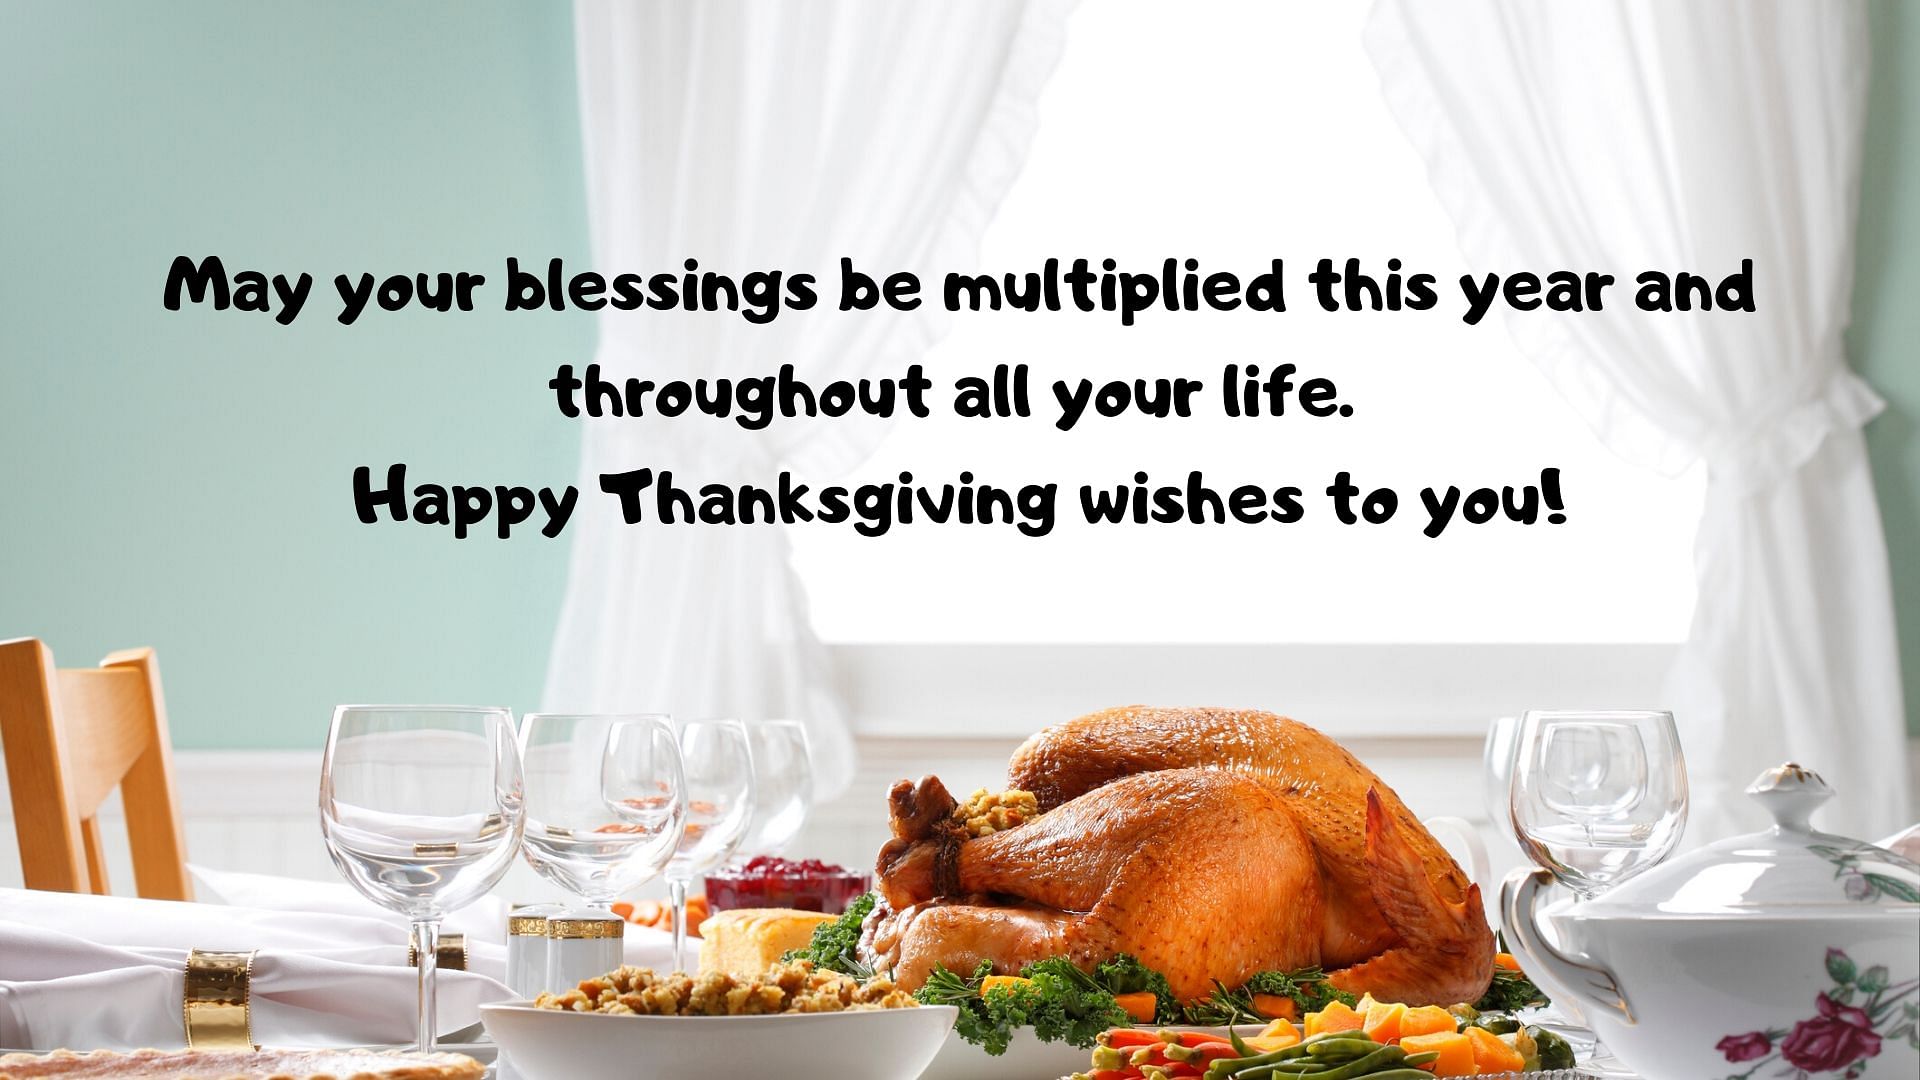 Thanksgiving 2019 Greetings, Wishes, Images, Quotes